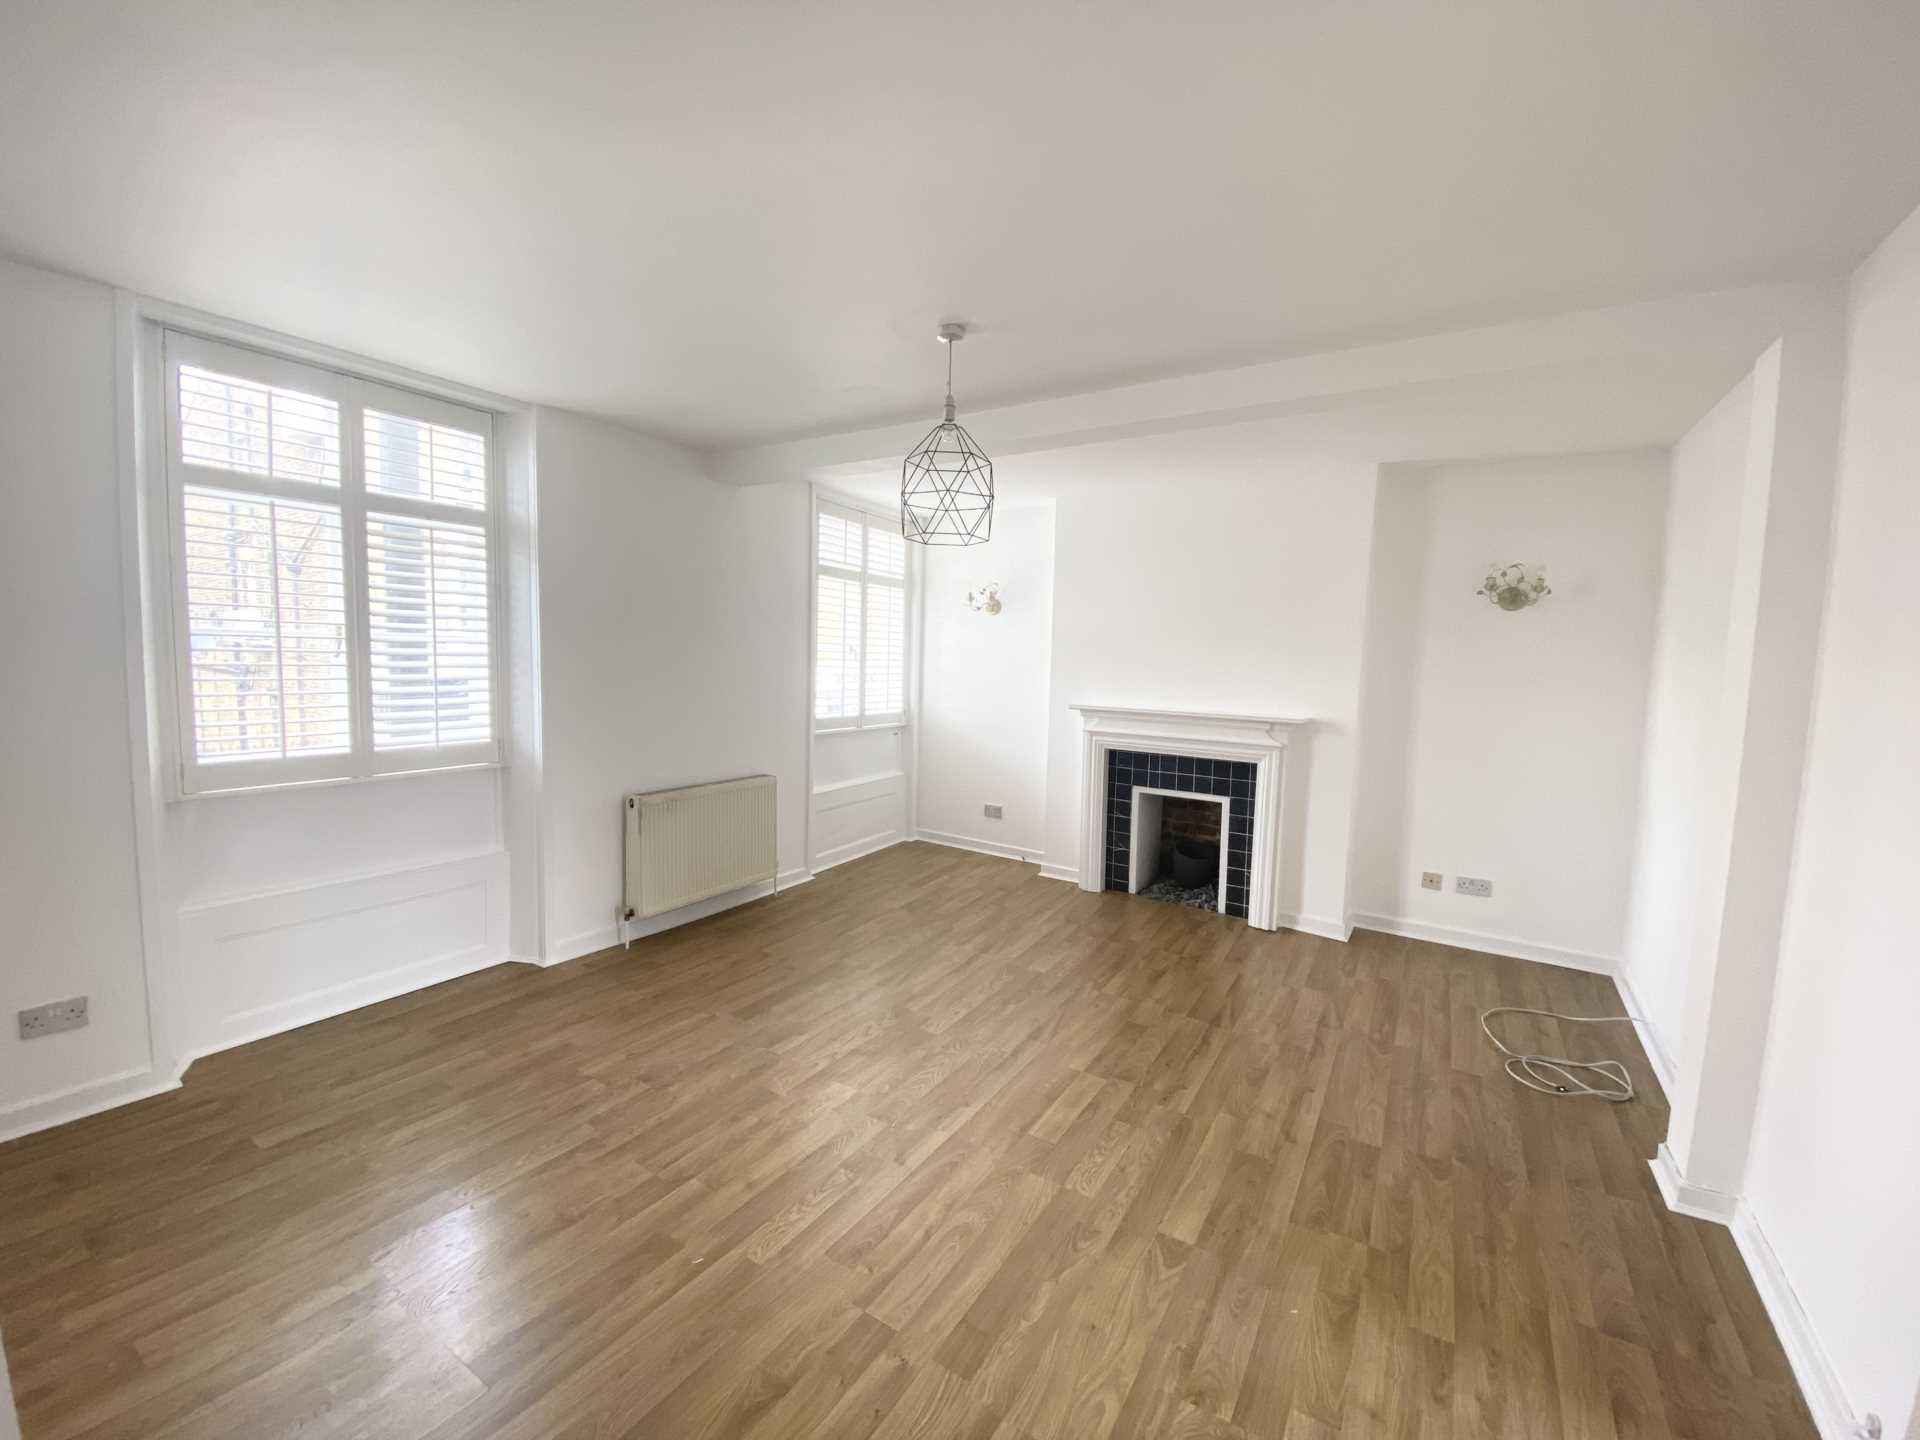 2 bed Flat for rent in Brentwood. From HS Estate Agents